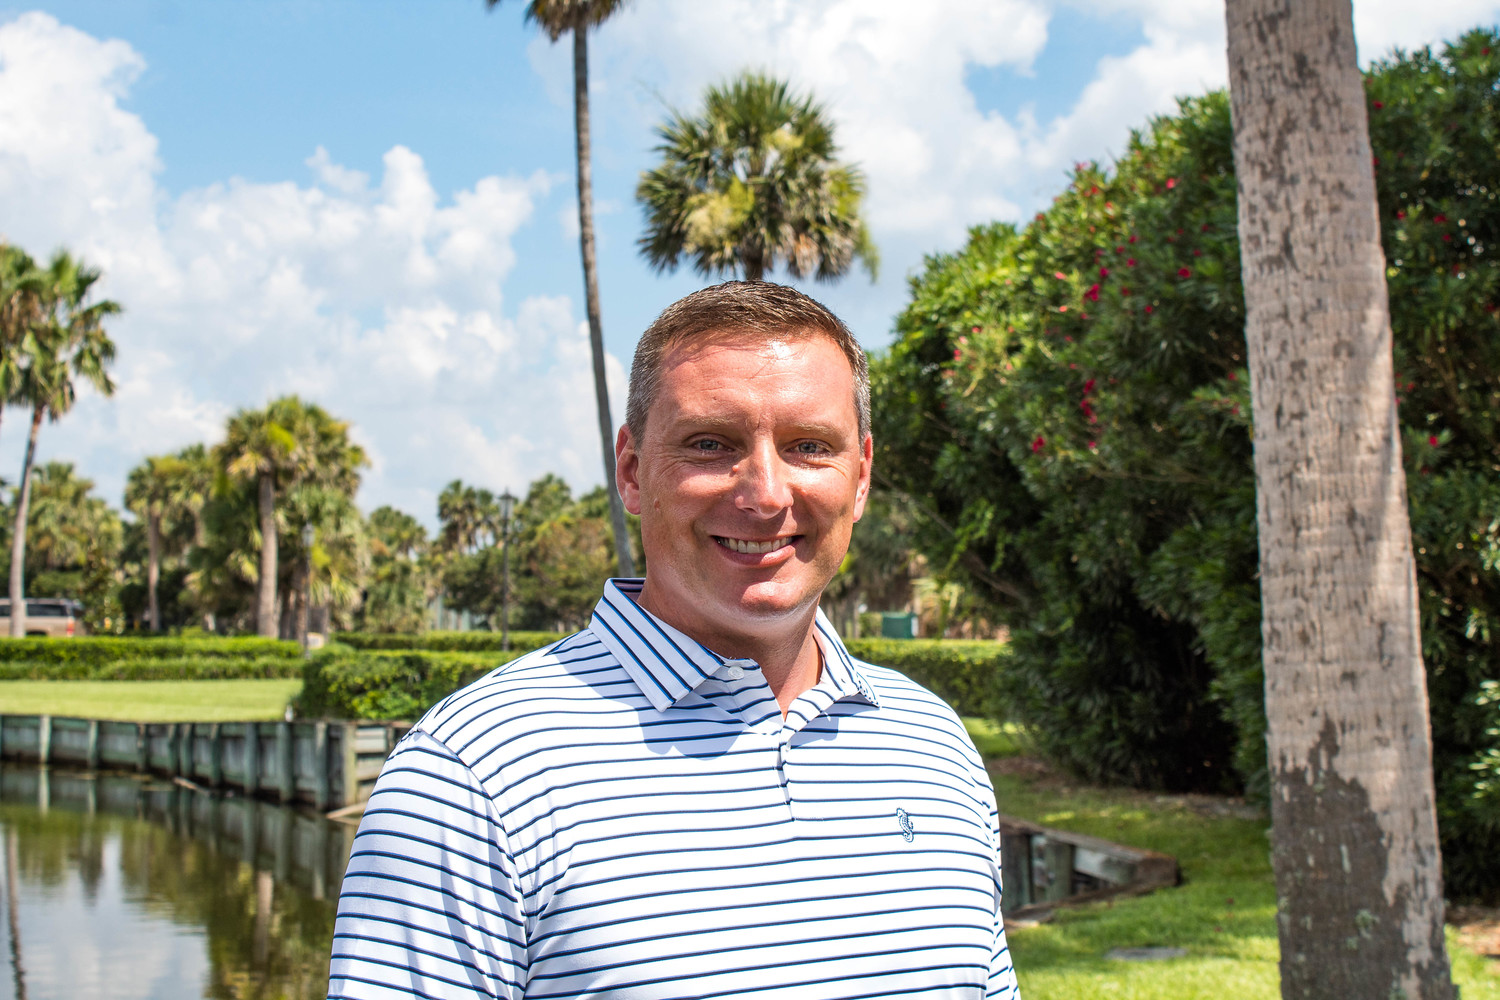 Stefan D. Brunt is the new head golf professional at the Ponte Vedra Inn & Club.